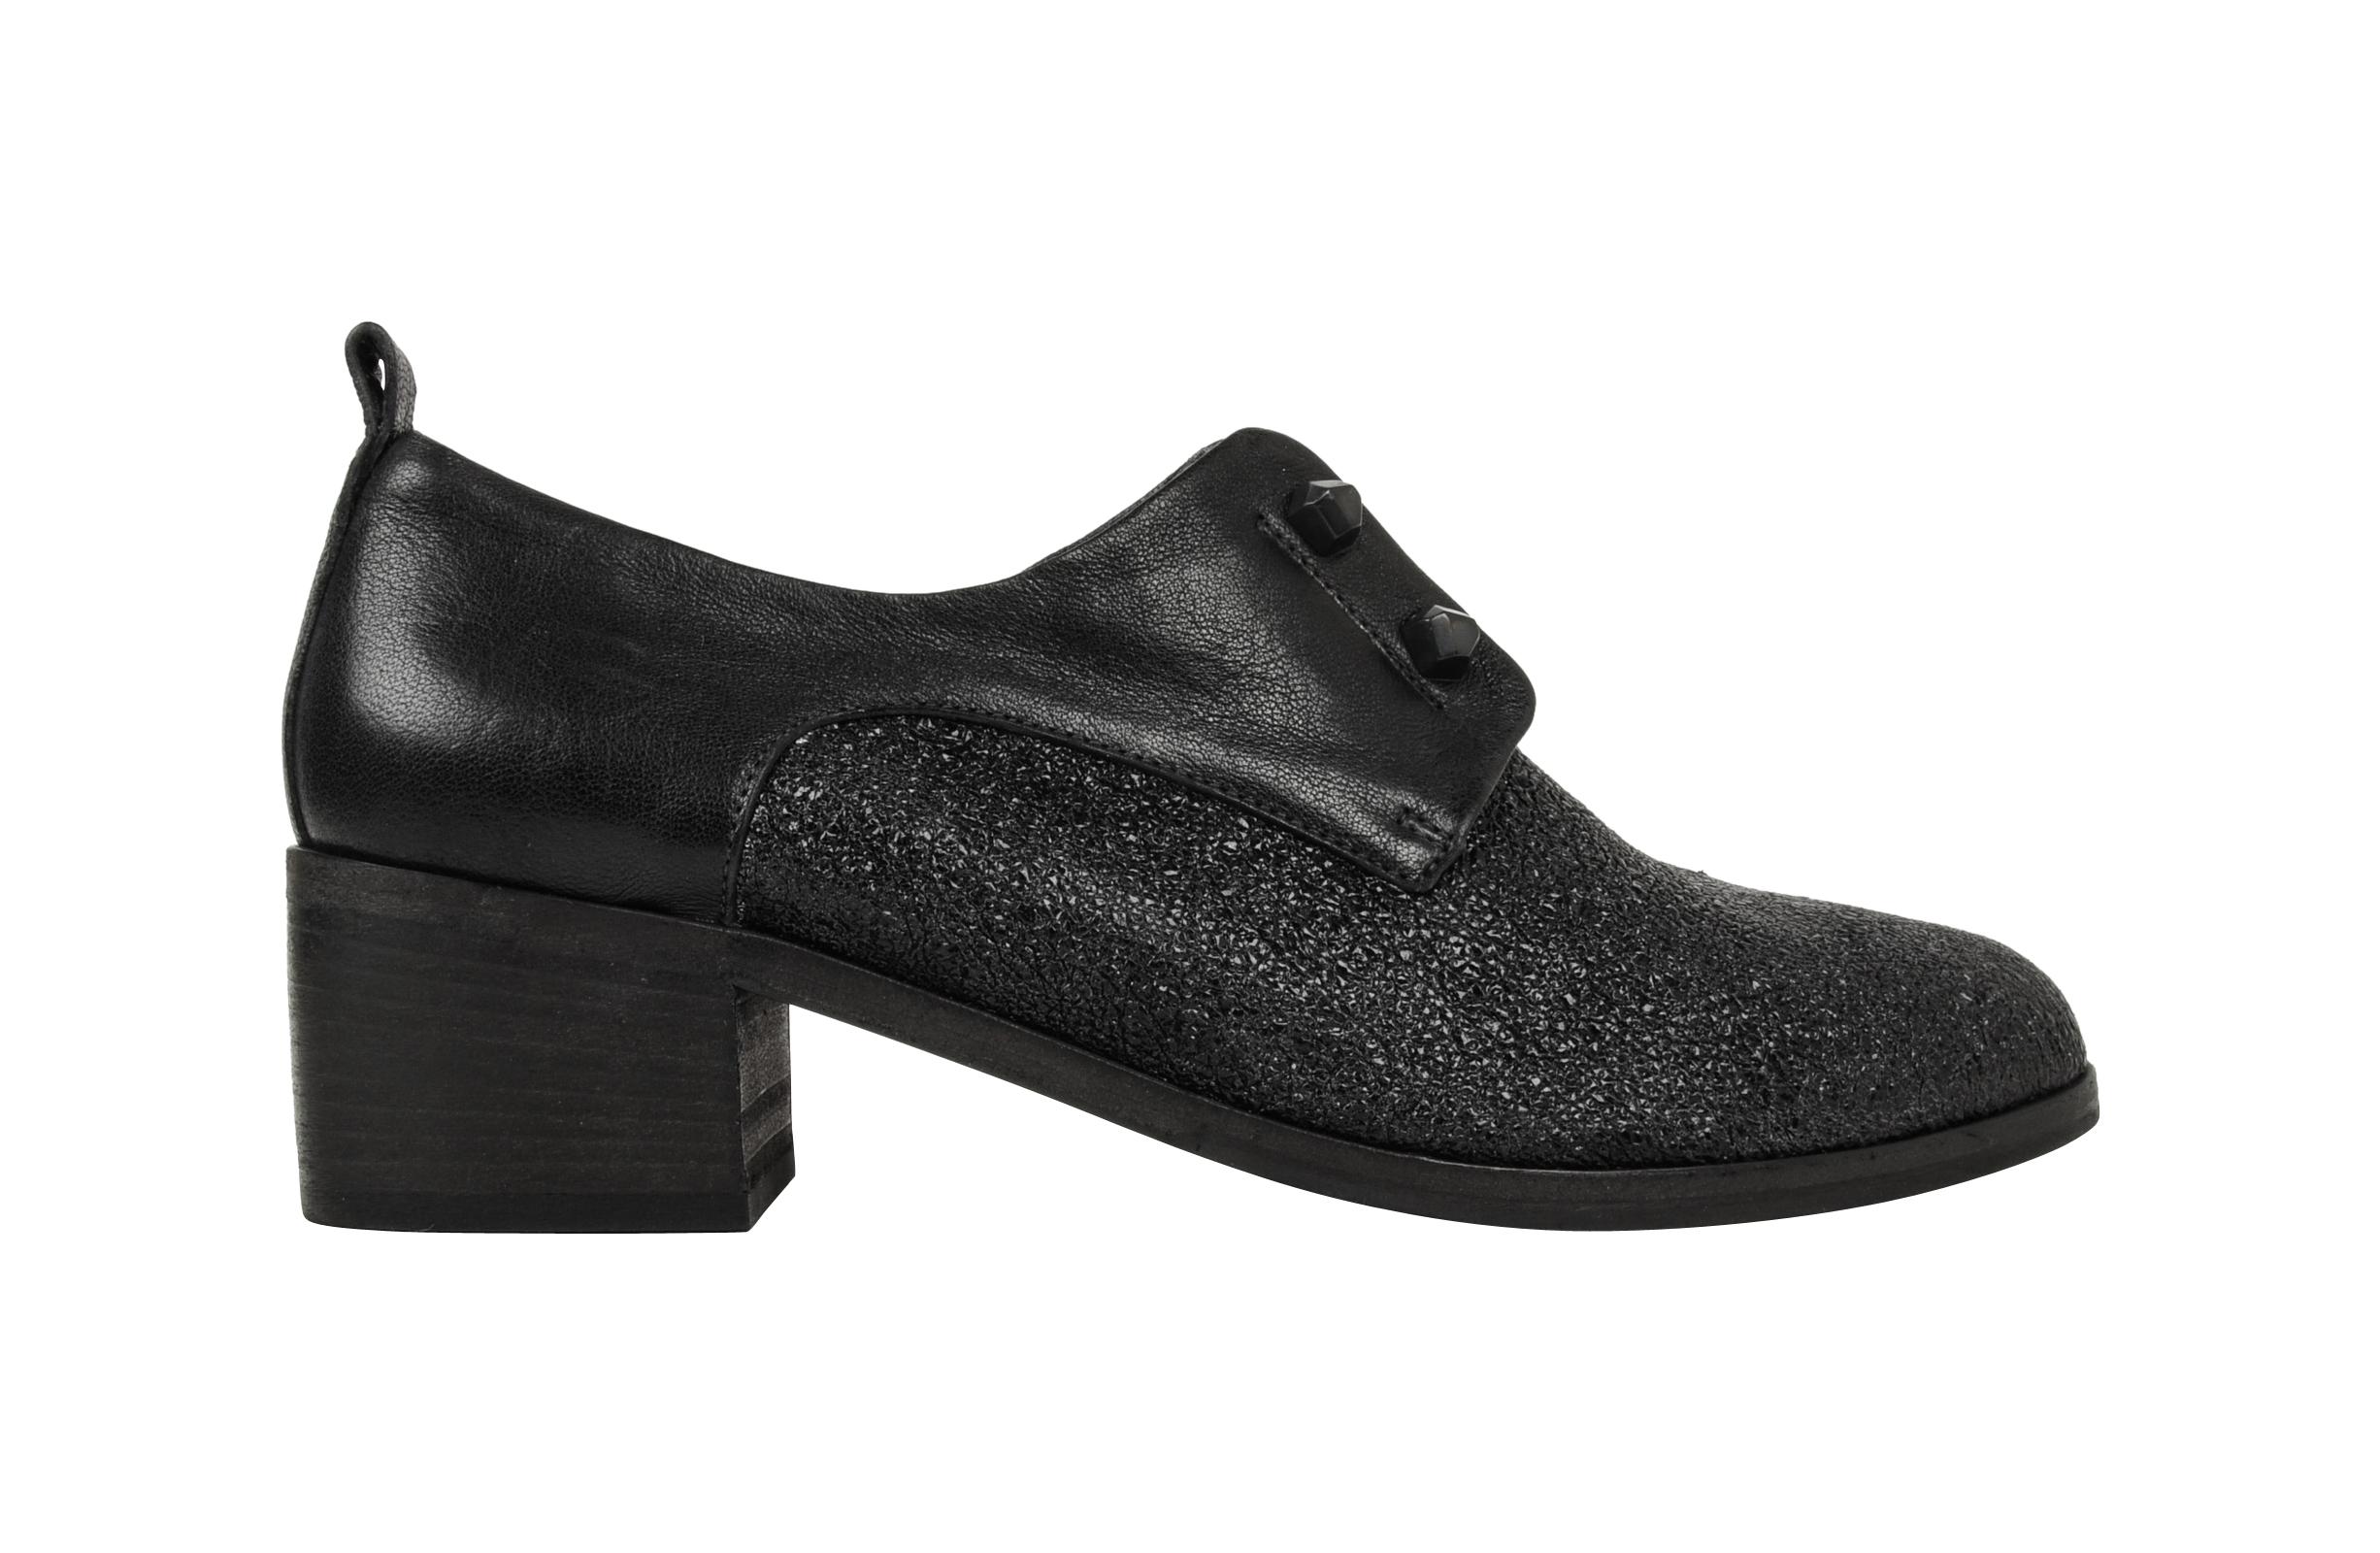 Black Henry Beguelin Shoe Loafer High Cut Textured Leather 39 / 9 New For Sale